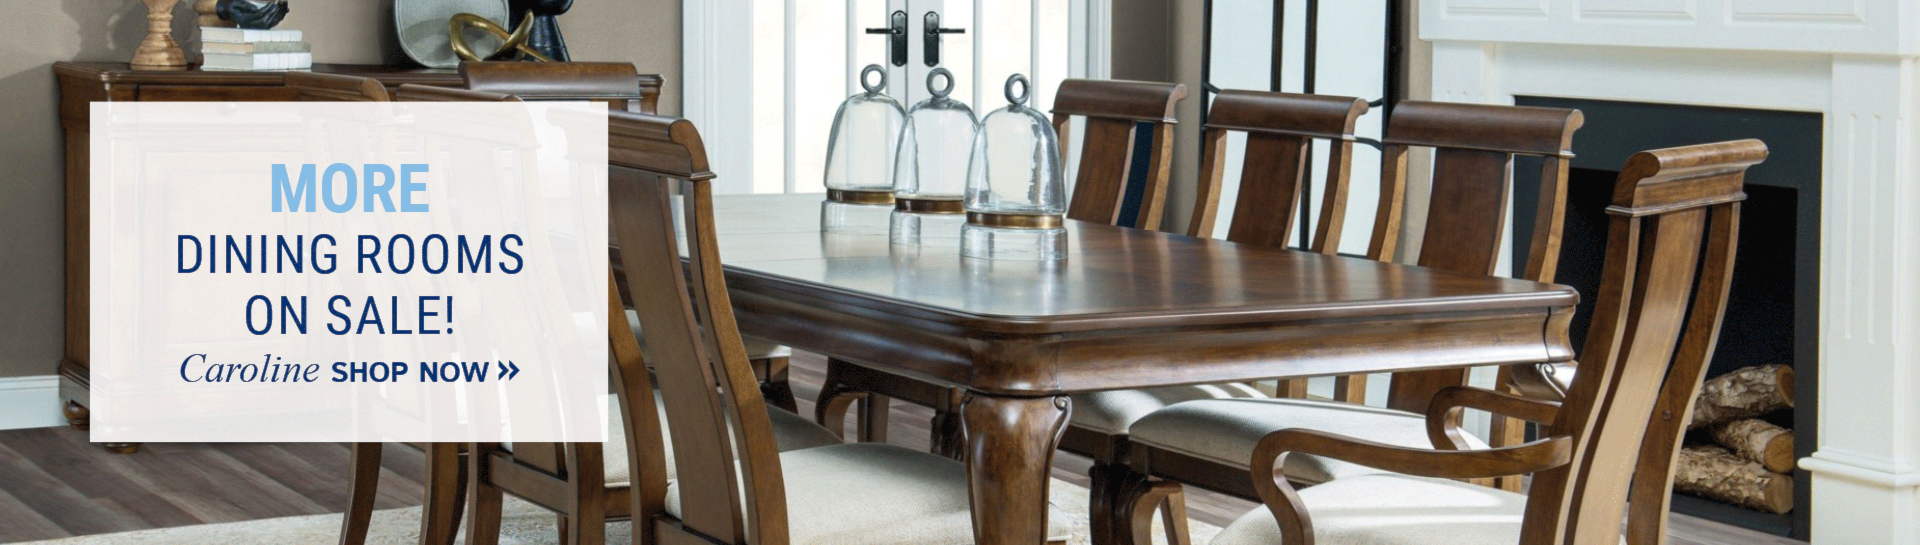 MORE Dining Rooms on Sale! Shop Now.